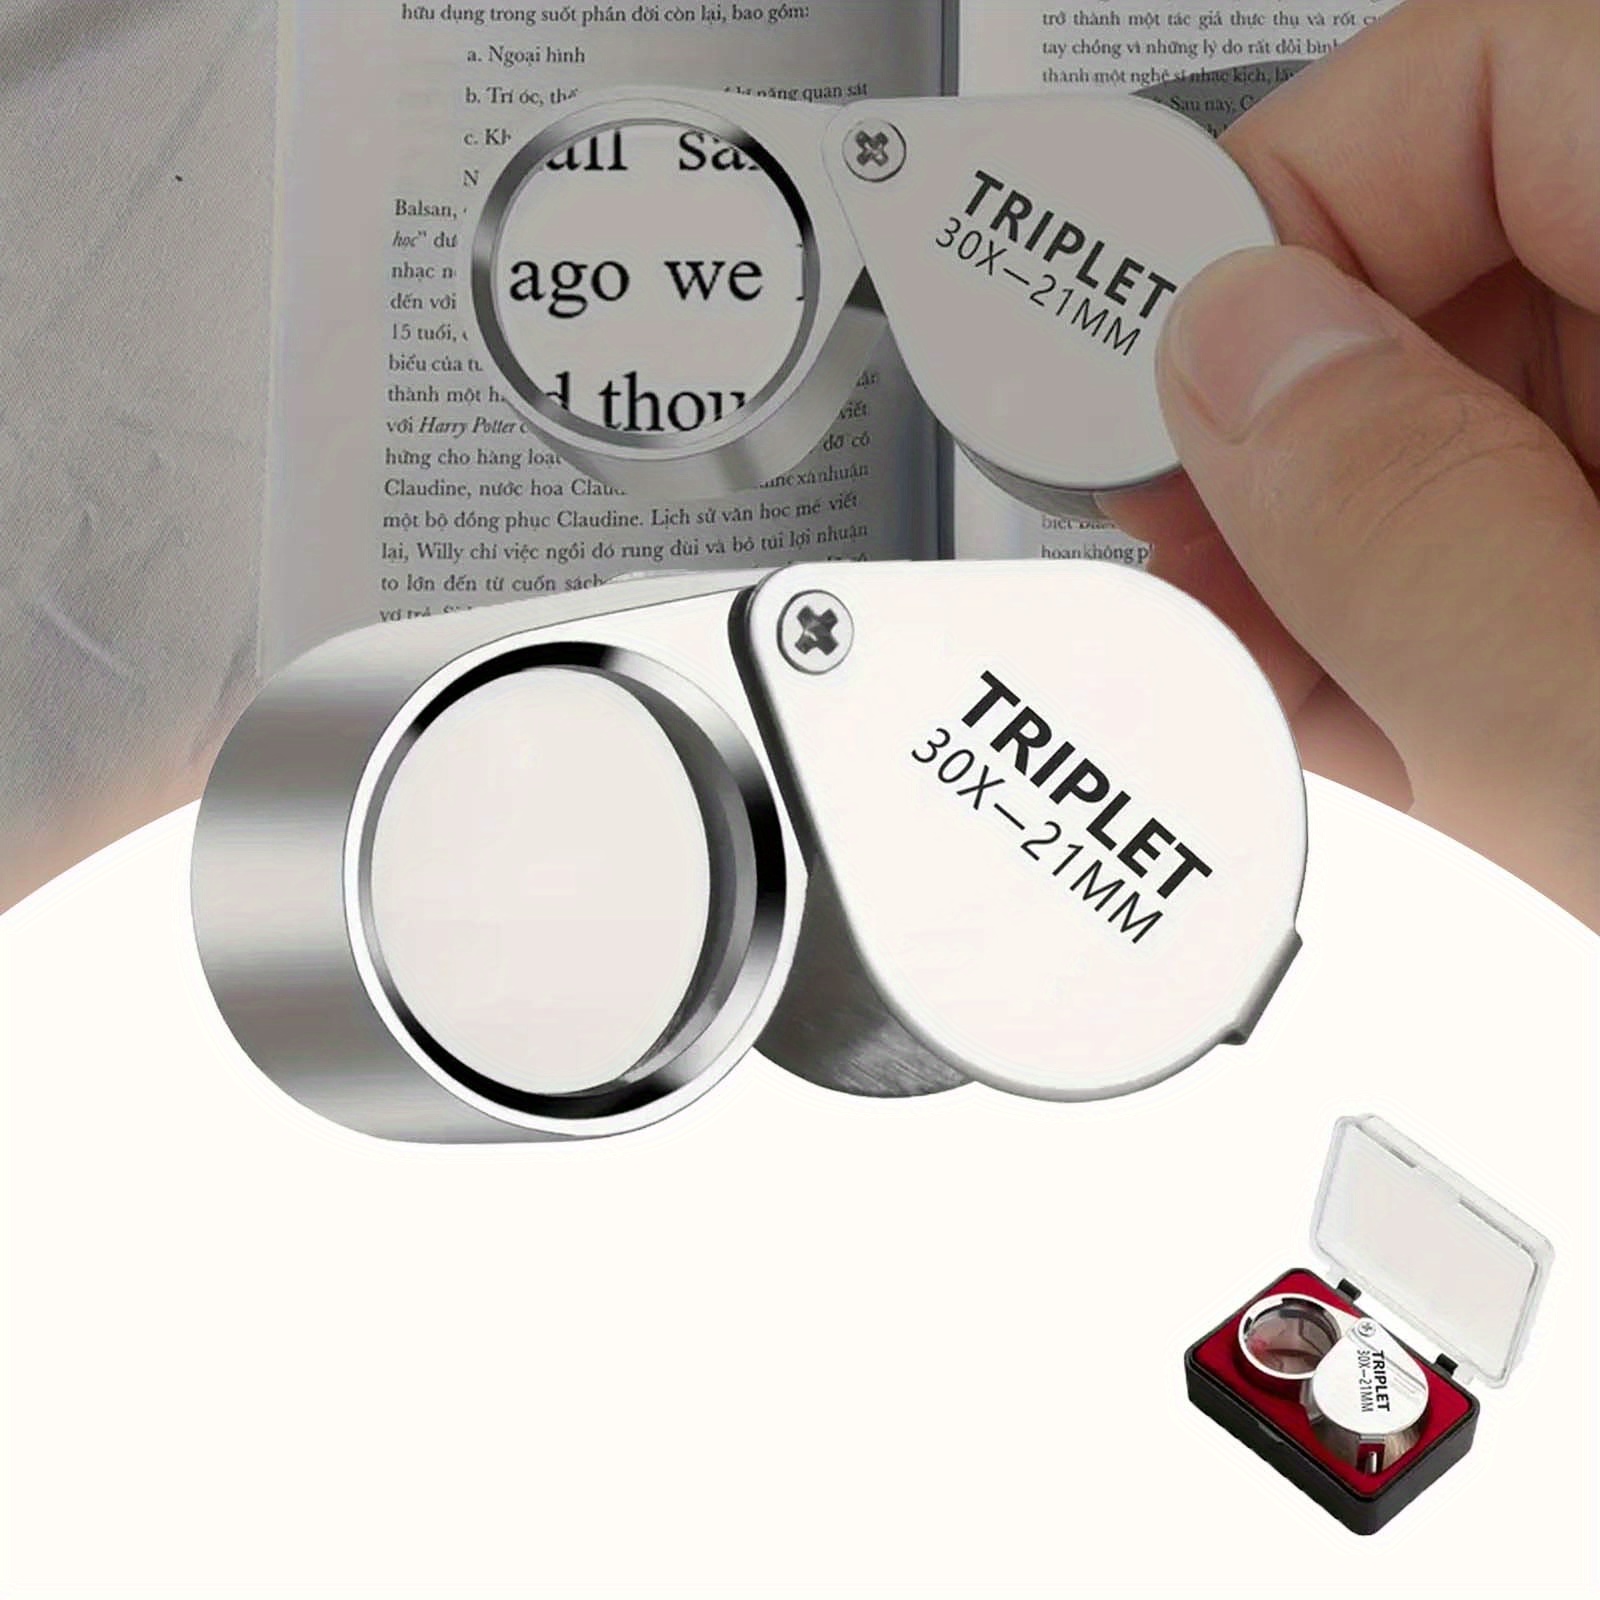 1pc Foldable 30x Magnifying Glass With Gift Box For Jewelry